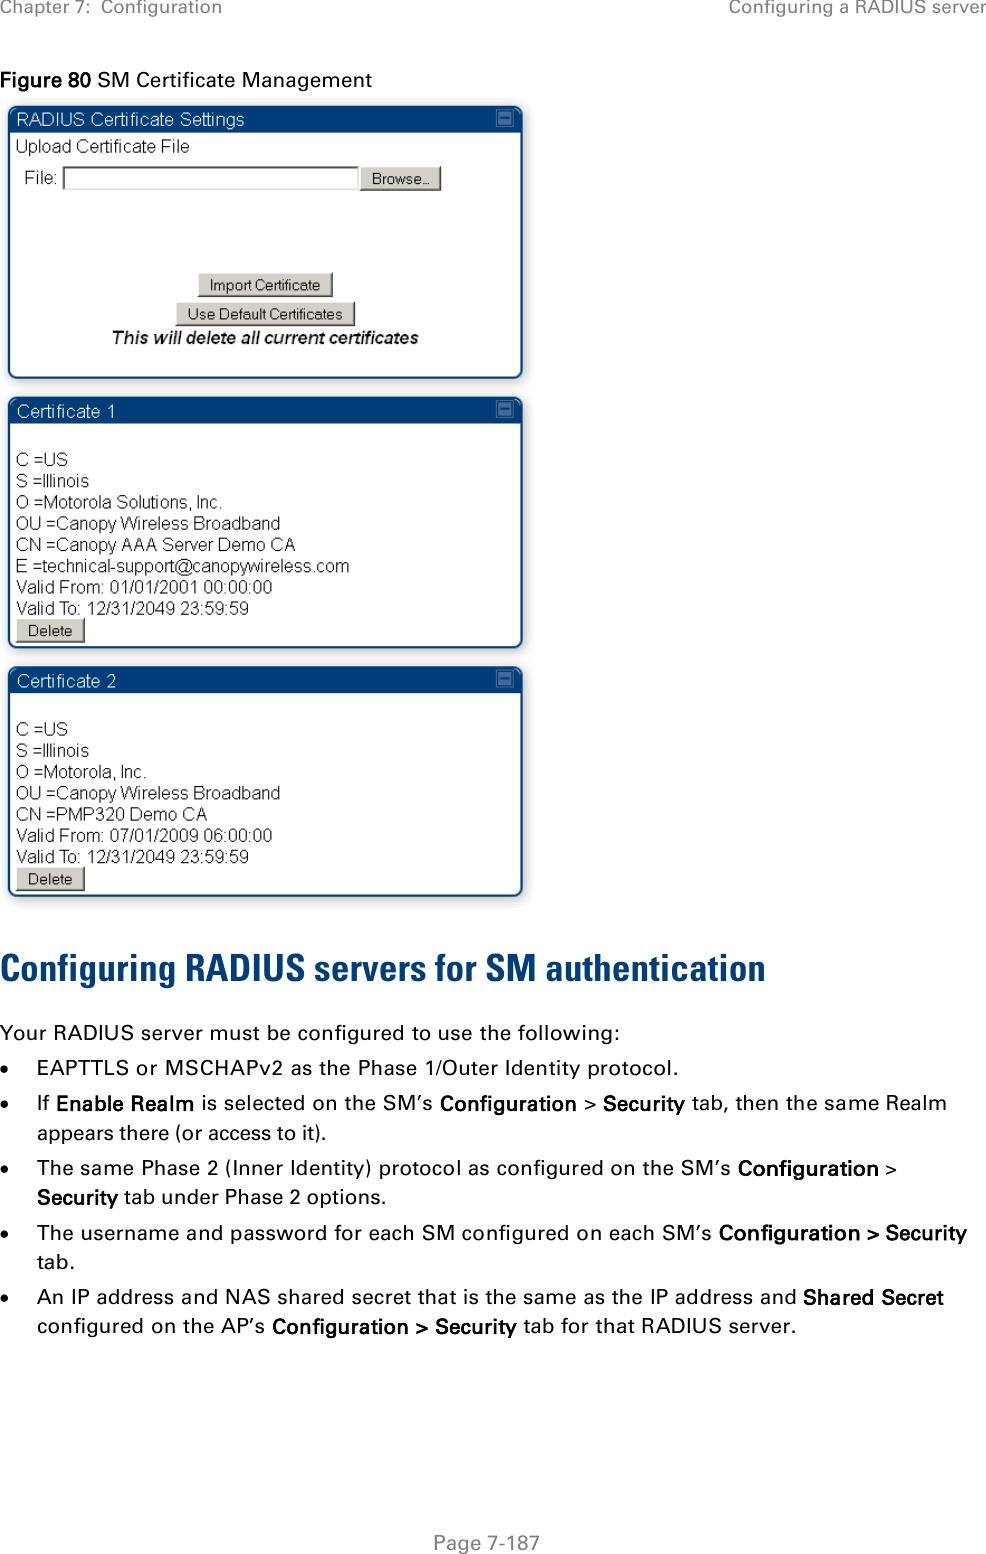 Chapter 7:  Configuration Configuring a RADIUS server   Page 7-187 Figure 80 SM Certificate Management  Configuring RADIUS servers for SM authentication Your RADIUS server must be configured to use the following: • EAPTTLS or MSCHAPv2 as the Phase 1/Outer Identity protocol. • If Enable Realm is selected on the SM’s Configuration &gt; Security tab, then the same Realm appears there (or access to it). • The same Phase 2 (Inner Identity) protocol as configured on the SM’s Configuration &gt; Security tab under Phase 2 options. • The username and password for each SM configured on each SM’s Configuration &gt; Security tab. • An IP address and NAS shared secret that is the same as the IP address and Shared Secret configured on the AP’s Configuration &gt; Security tab for that RADIUS server. 